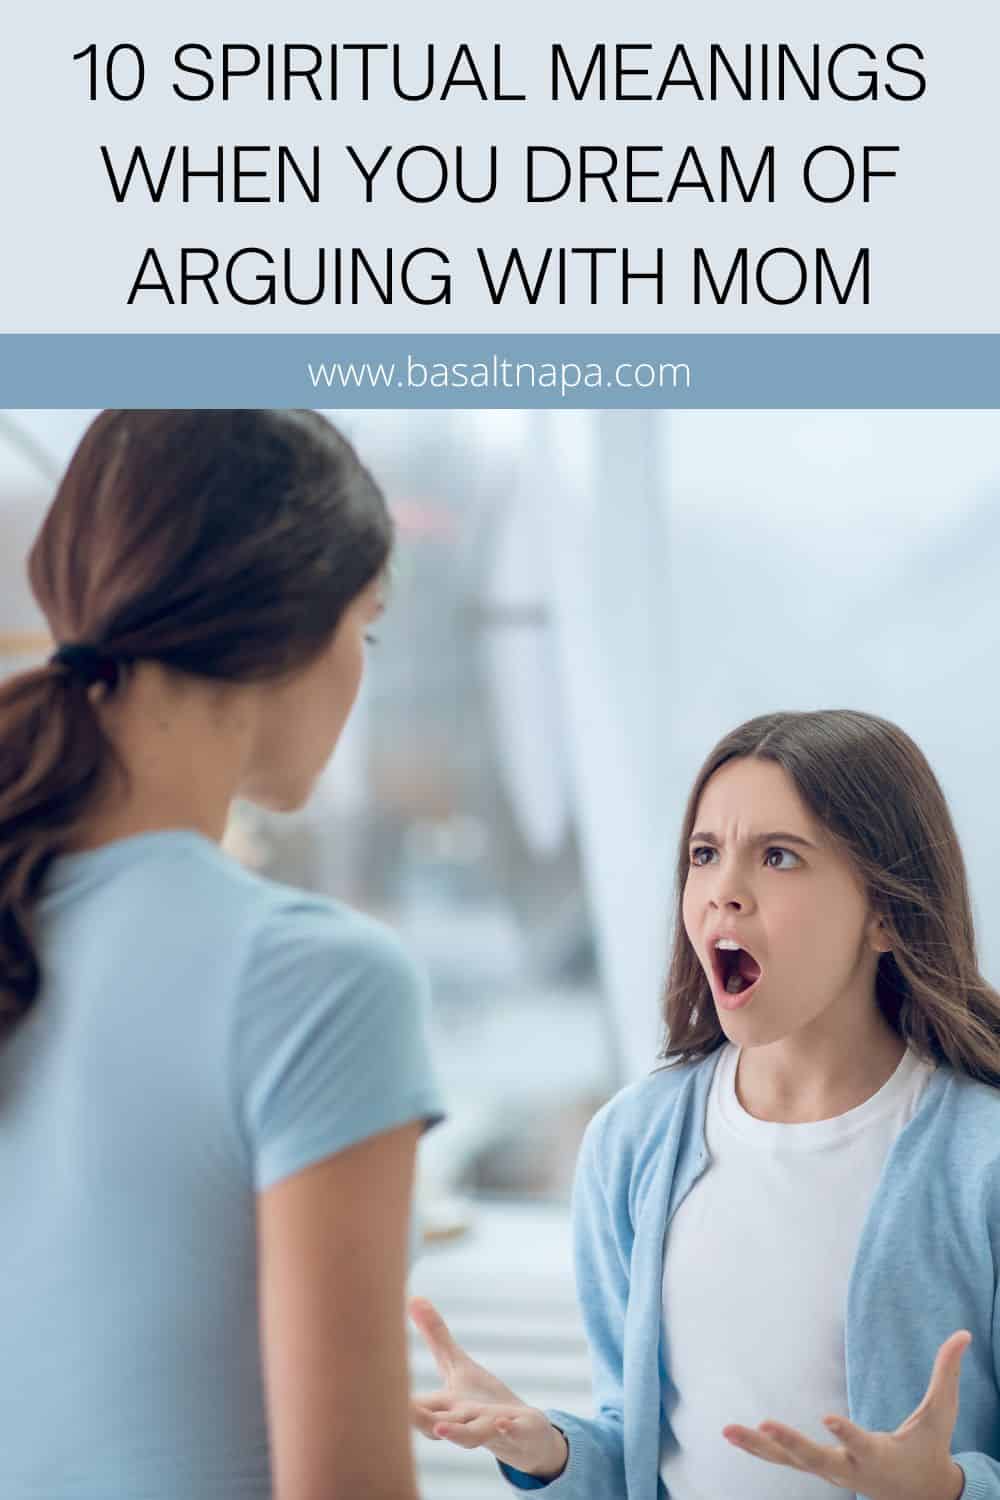 10 Spiritual Meanings When You Dream Of Arguing With Mom